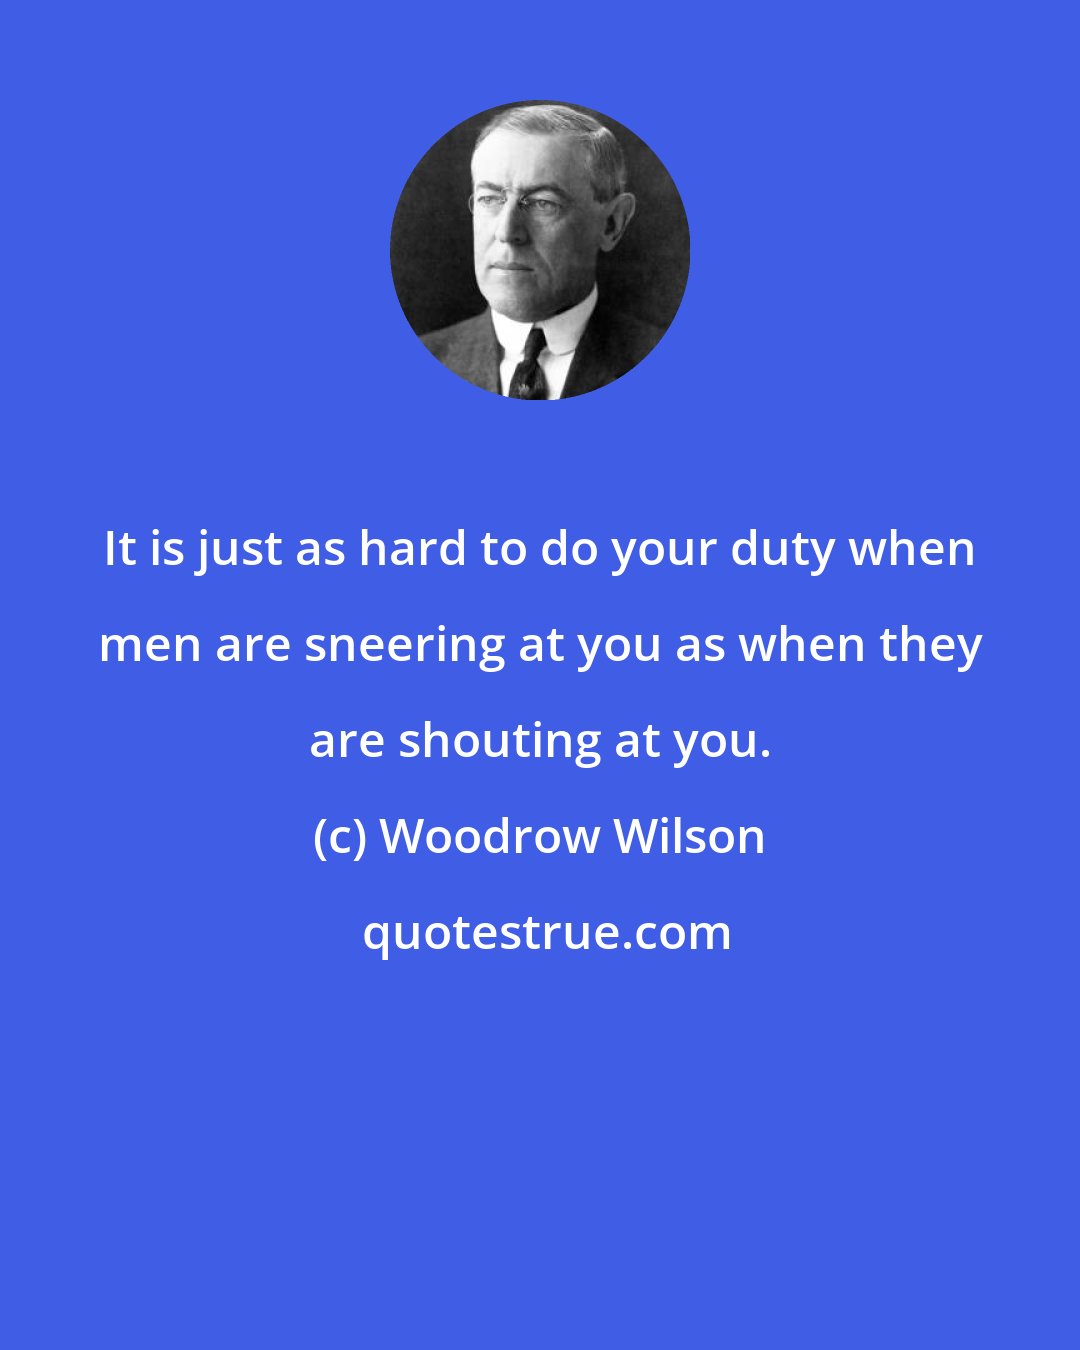 Woodrow Wilson: It is just as hard to do your duty when men are sneering at you as when they are shouting at you.